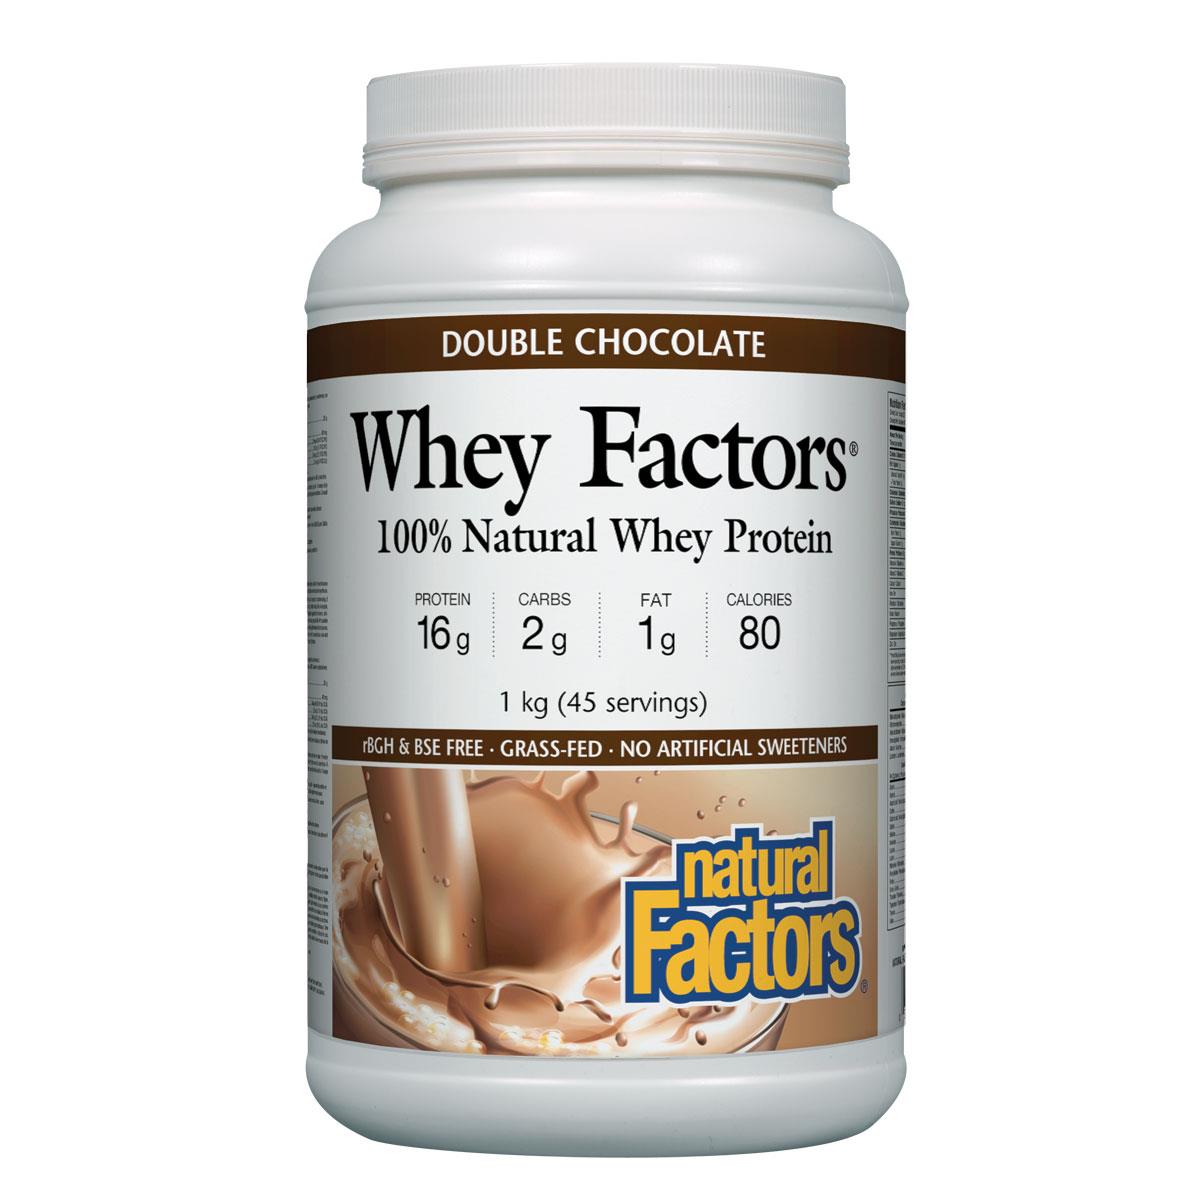 Natural Factors 100% Natural Whey Protein, Double Chocolate, 1kg